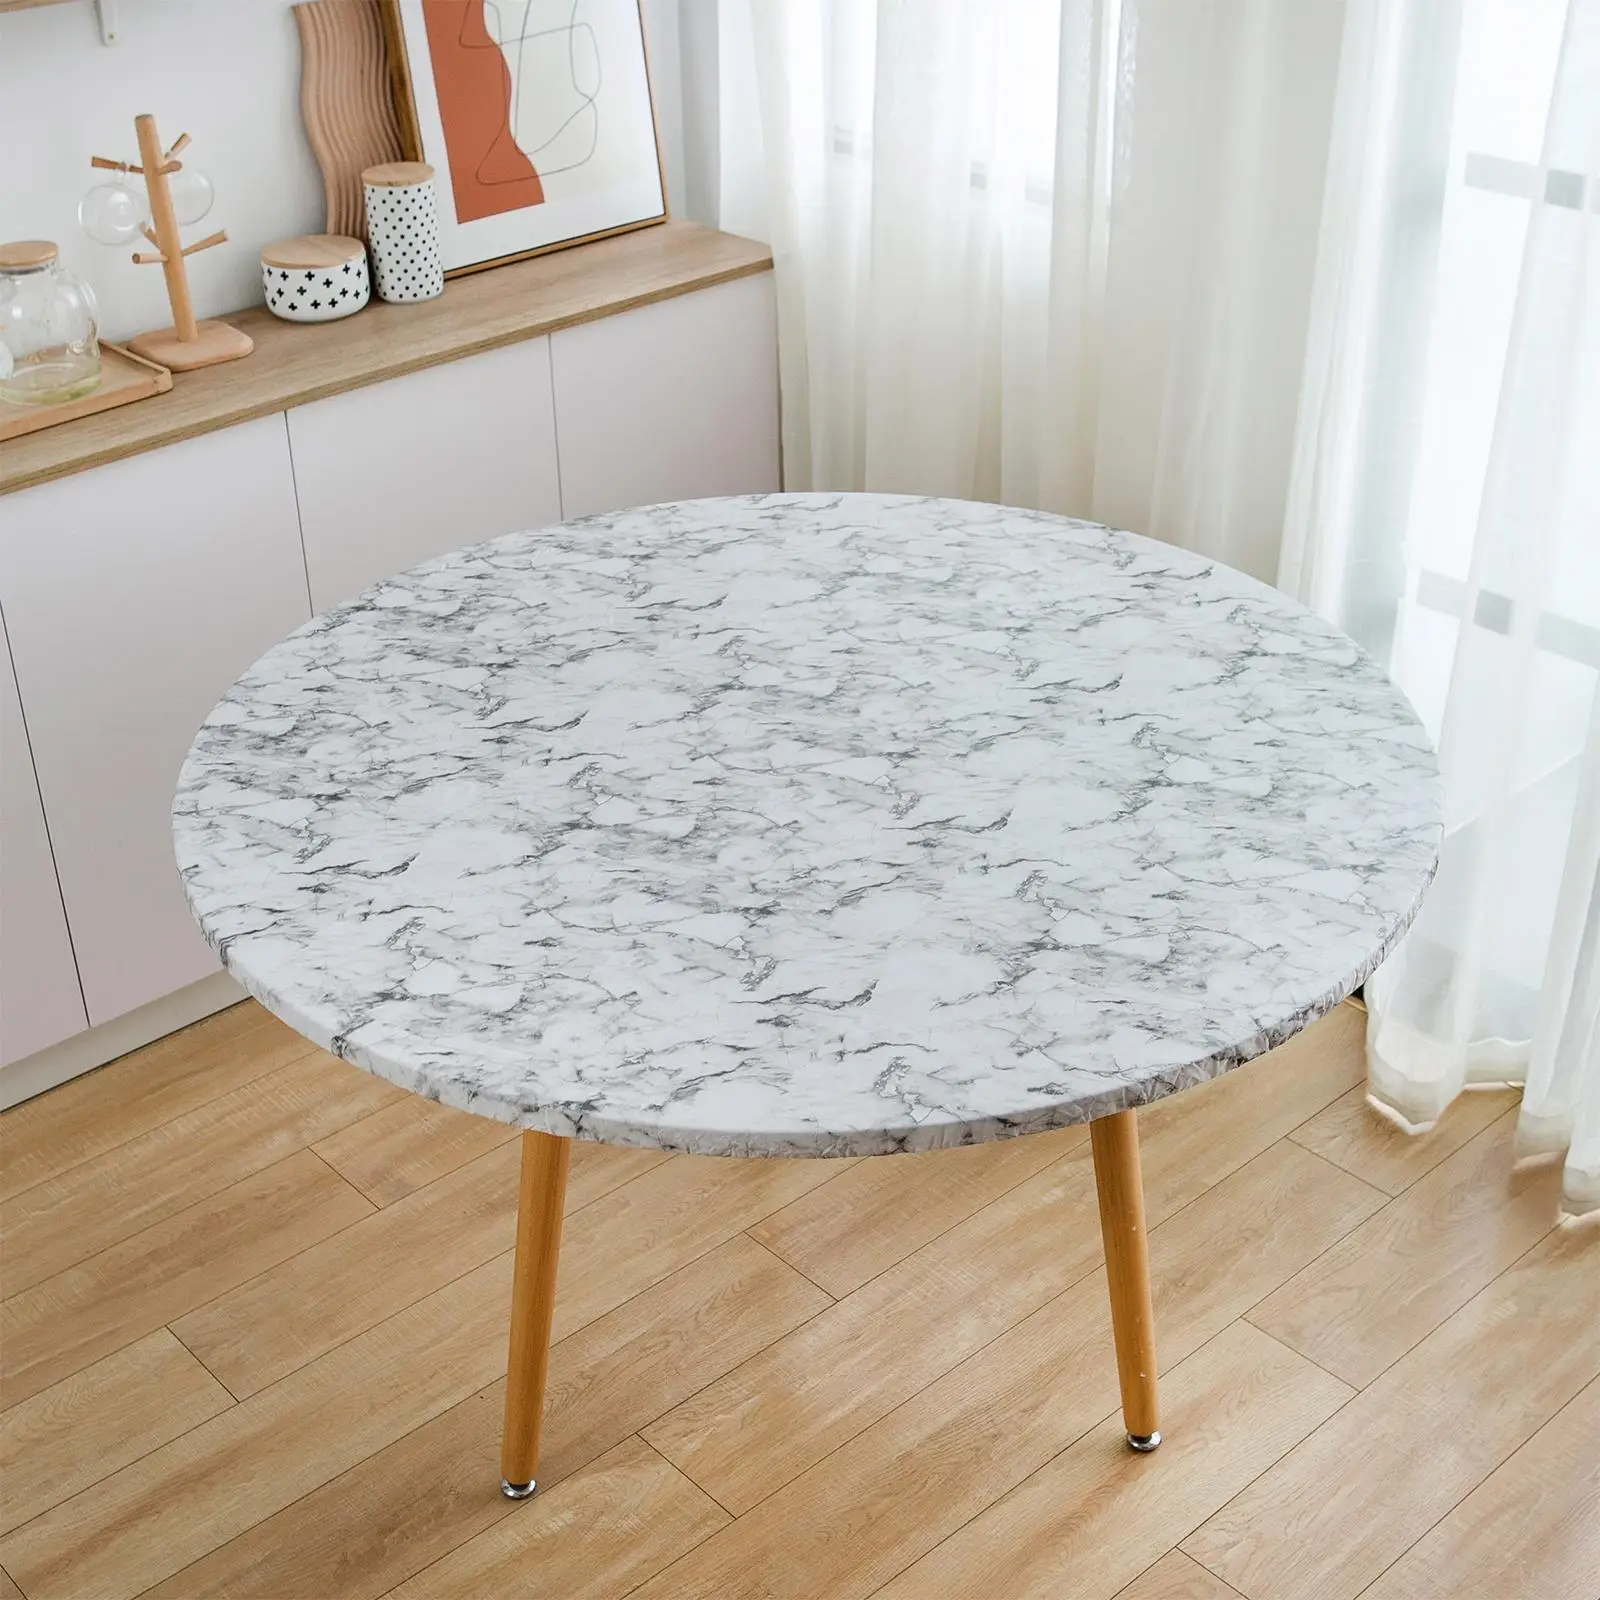 Round Vinyl Fitted Tablecloth Table Cloth Stain Resistant with Flannel Backing Waterproof Oil Proof Elastic Edge Table Cover